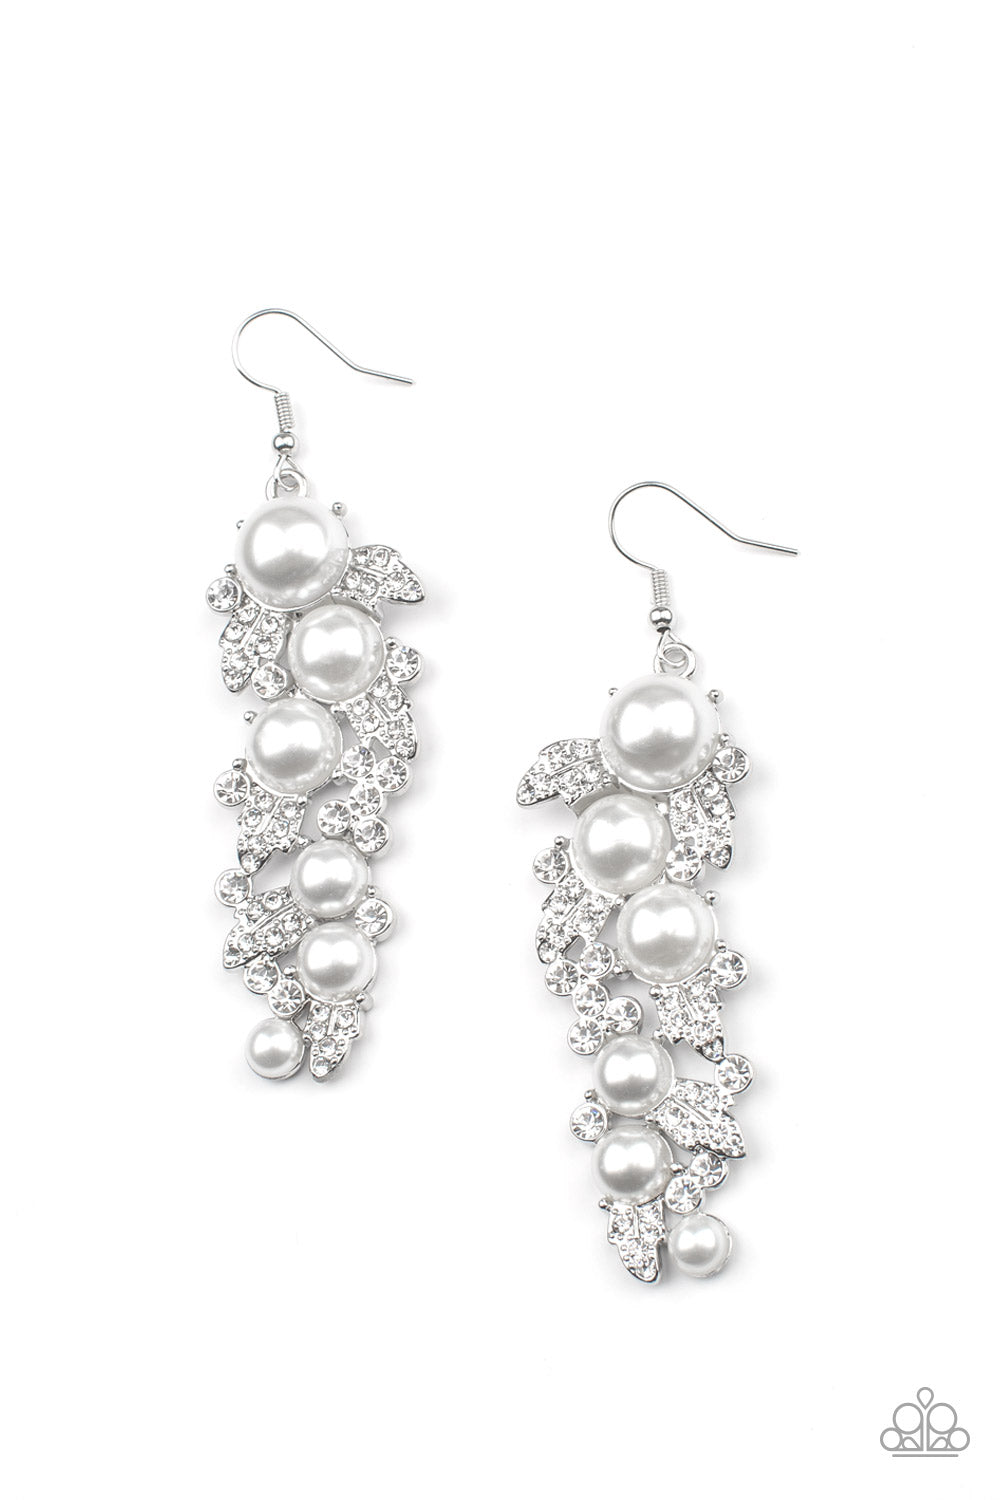 An explosion of glittery white rhinestones and oversized pearls coalesce into an exaggerated leafy silver lure, creating a dramatic statement piece. Earring attaches to a standard fishhook fitting.  Sold as one pair of earrings.